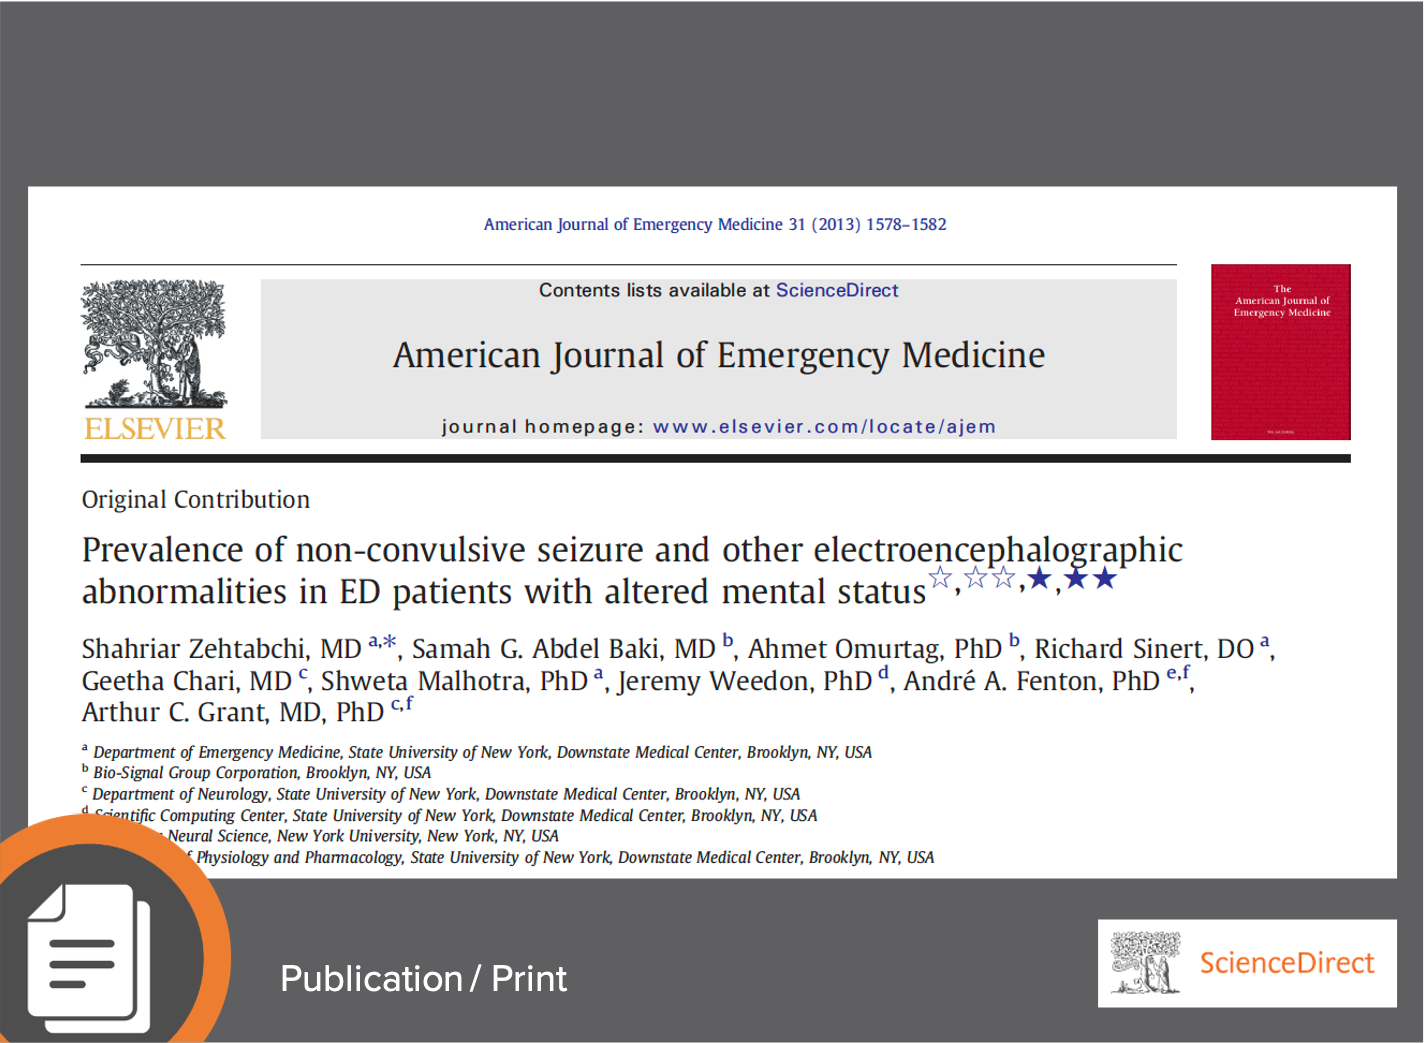 Prevalence of Non-Convulsive Seizure and Other Electroencephalographic Abnormalities in ED Patients with Altered Mental Status